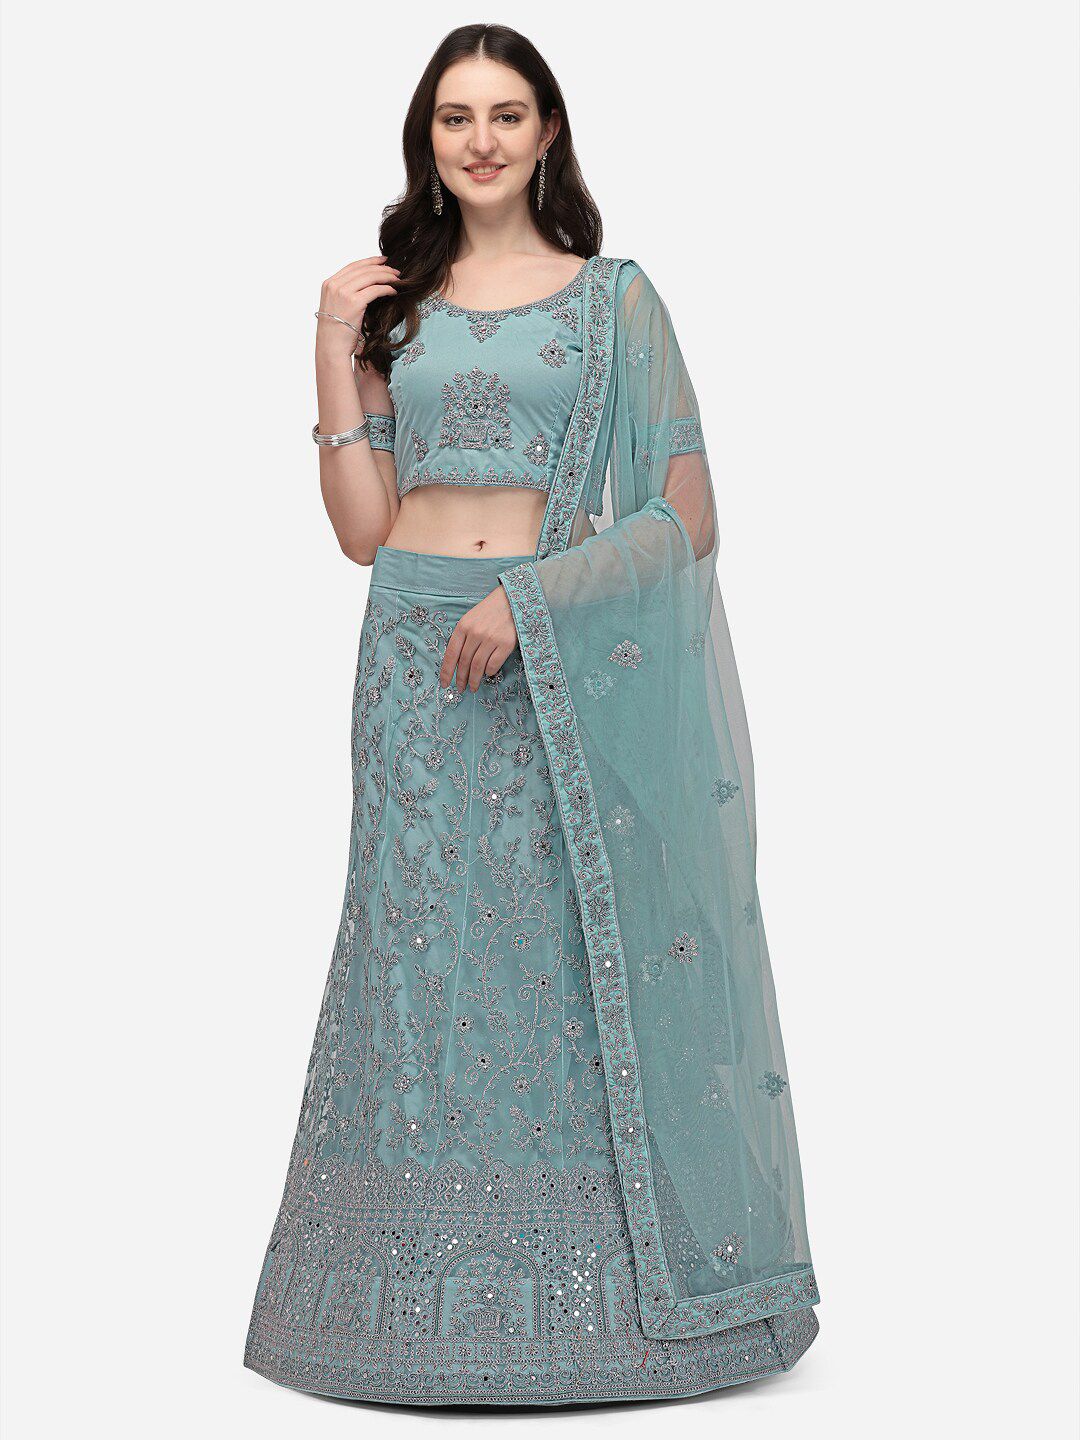 VRSALES Turquoise Blue Embroidered Mirror Work Semi-Stitched Lehnga Choli Set Price in India